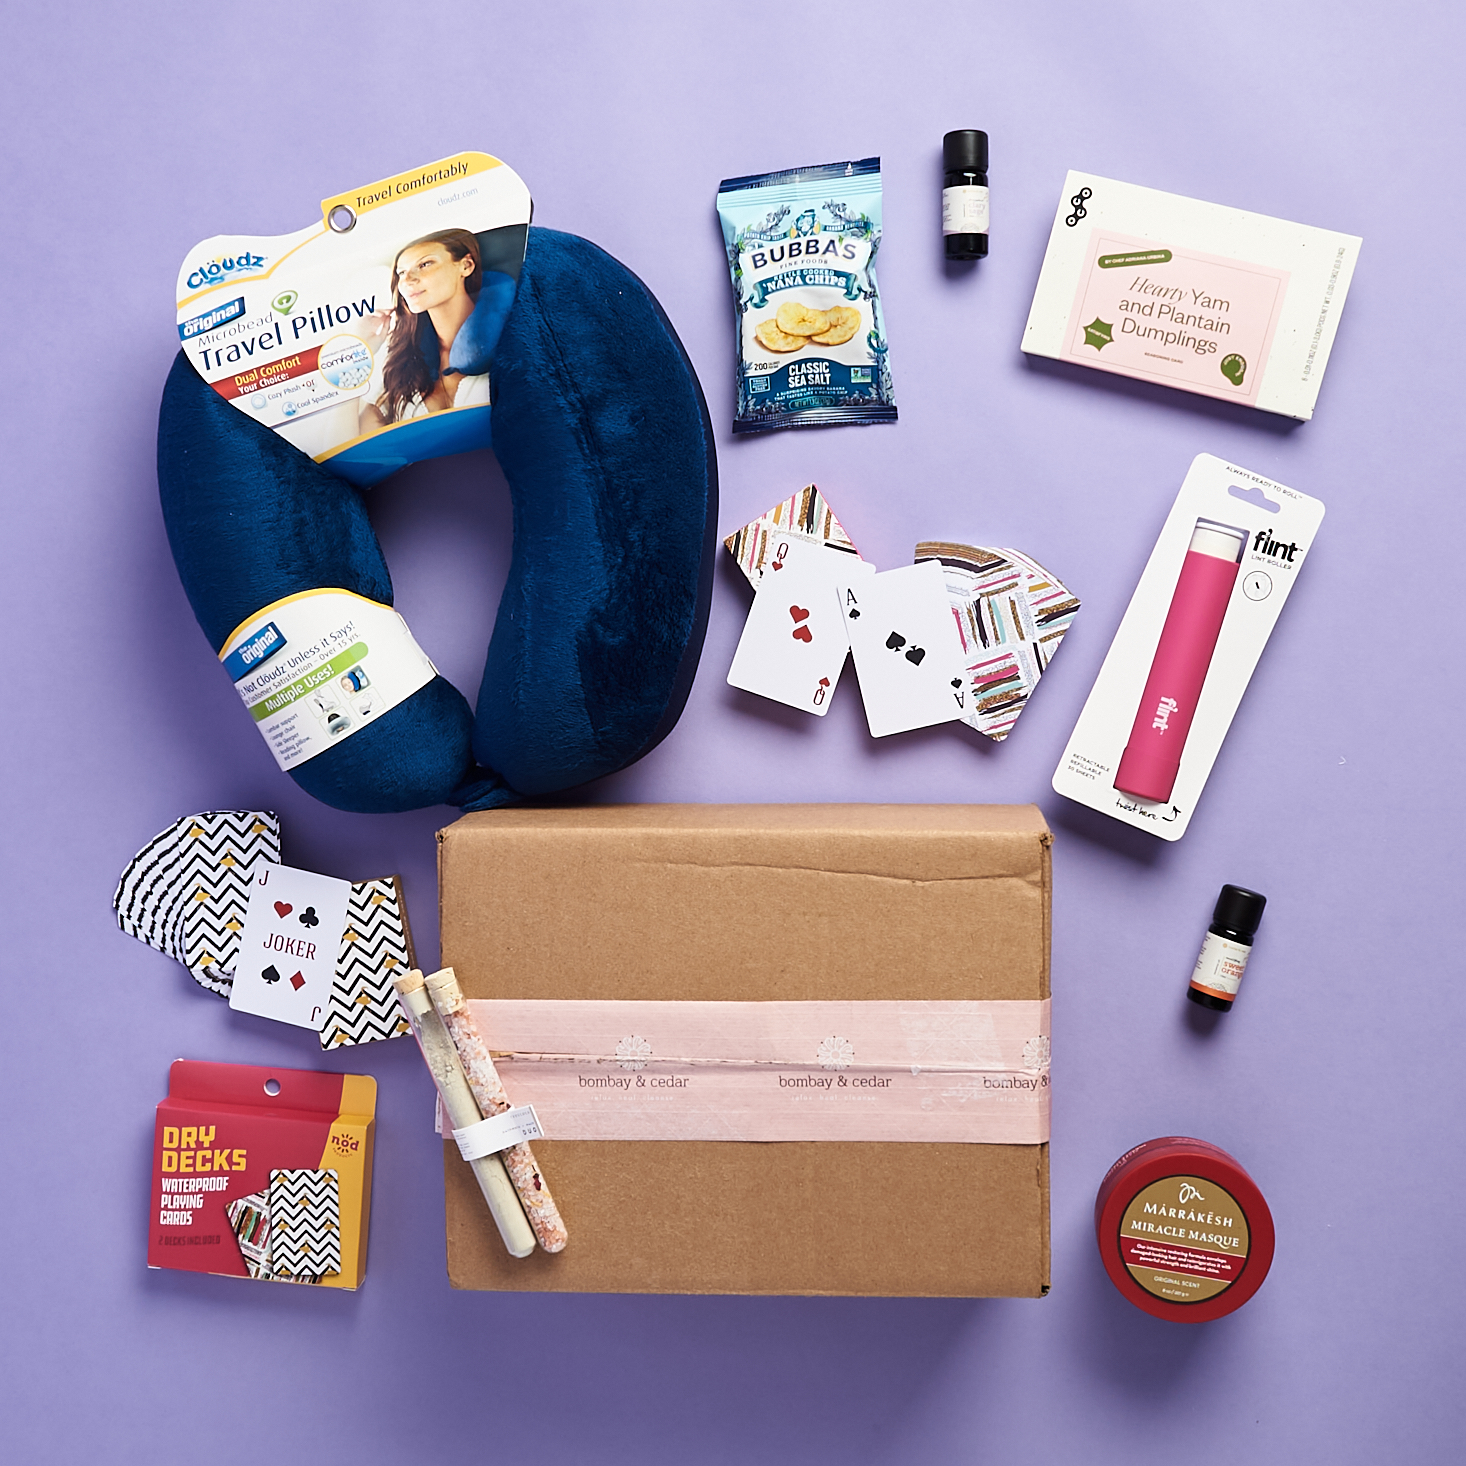 Bombay & Cedar Lifestyle Box “Wander” Review + Coupon